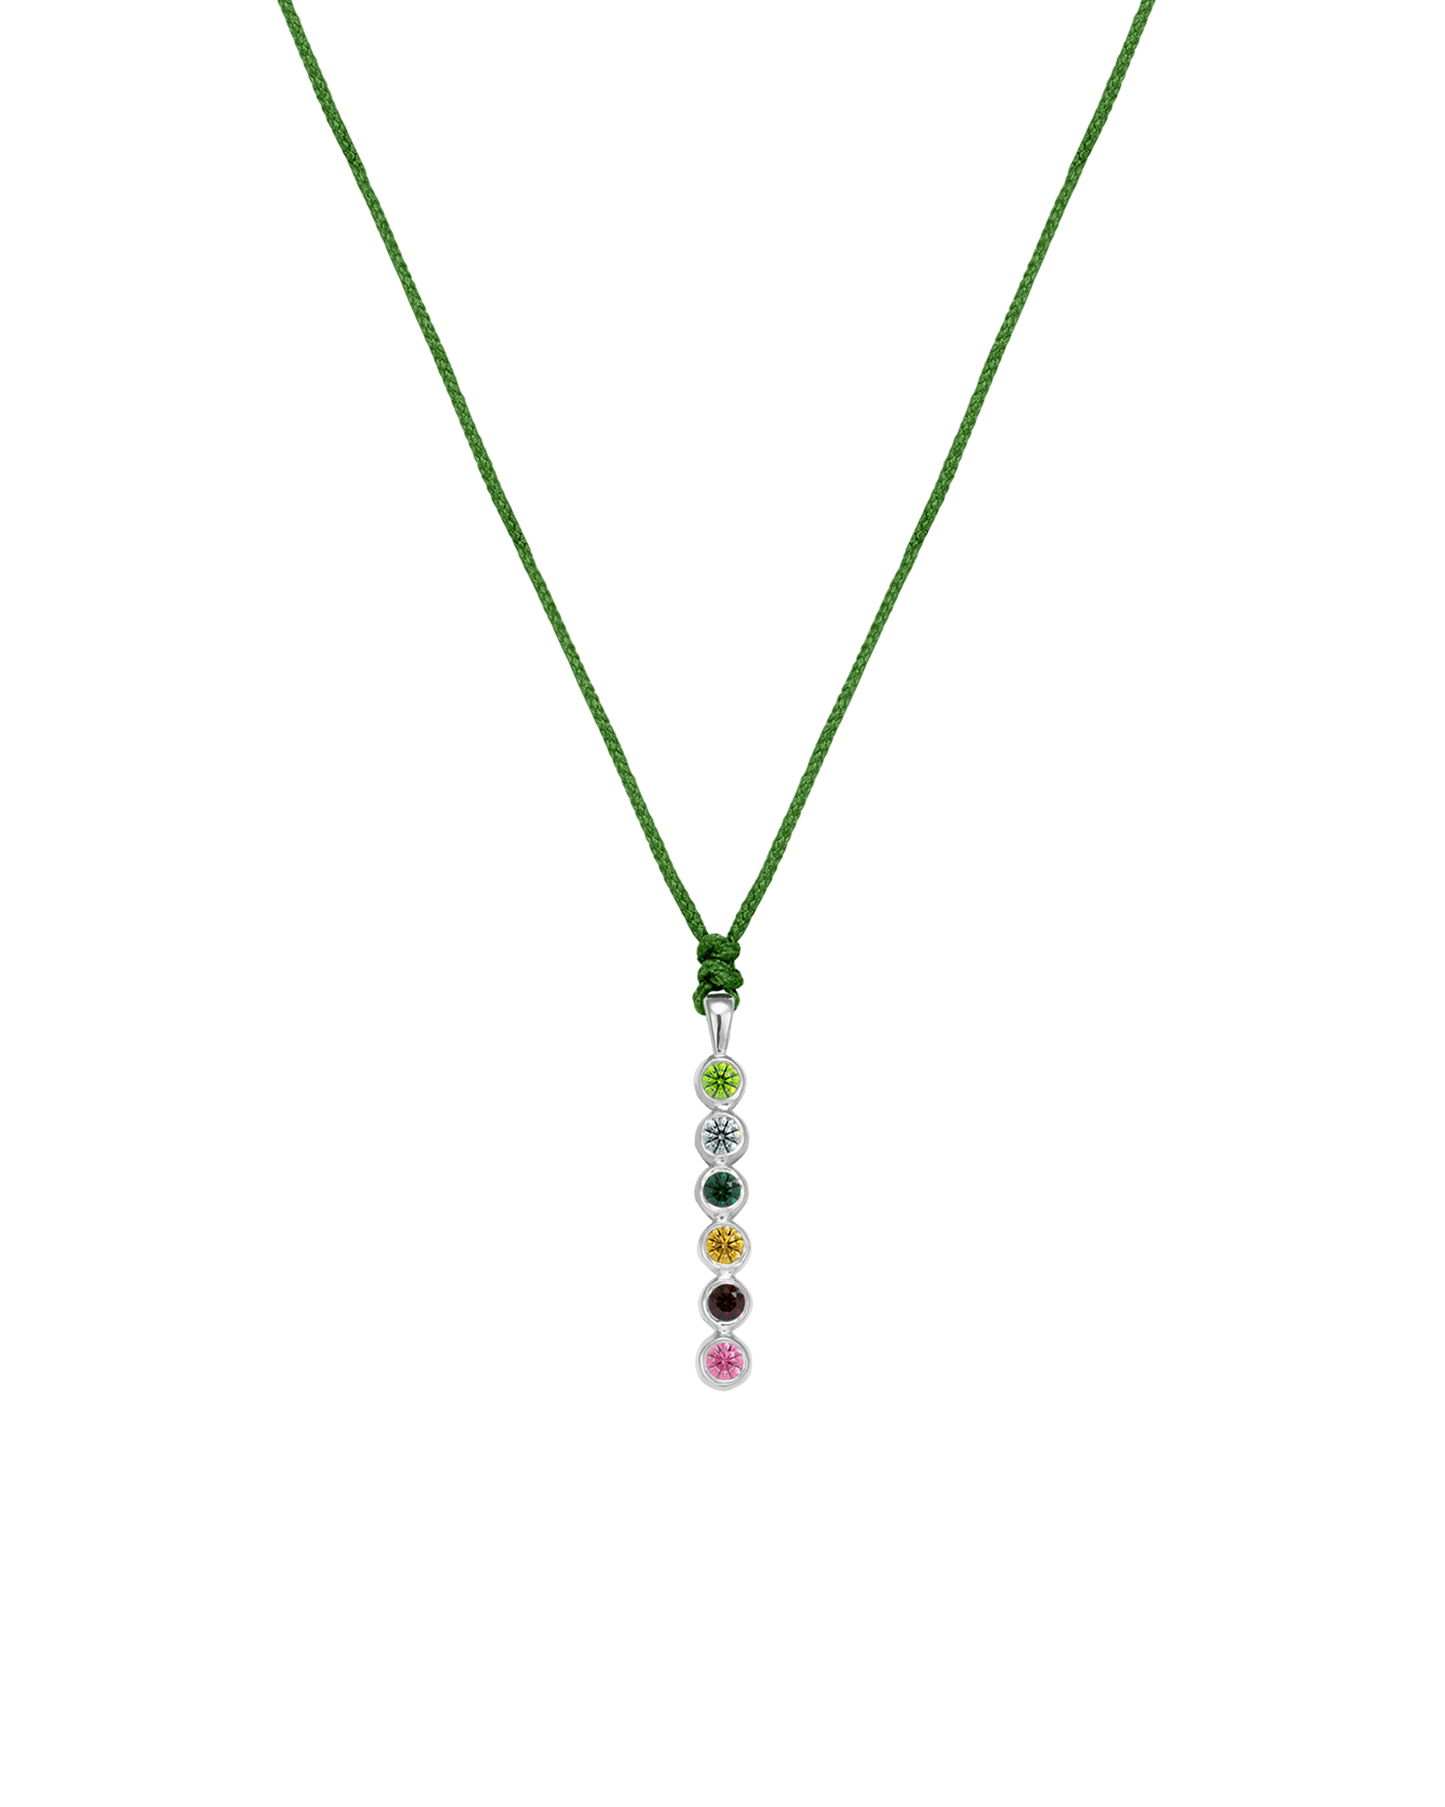 The Birthstones Bar Necklace - 14K White Gold Necklaces 14K Solid Gold Mint 2 